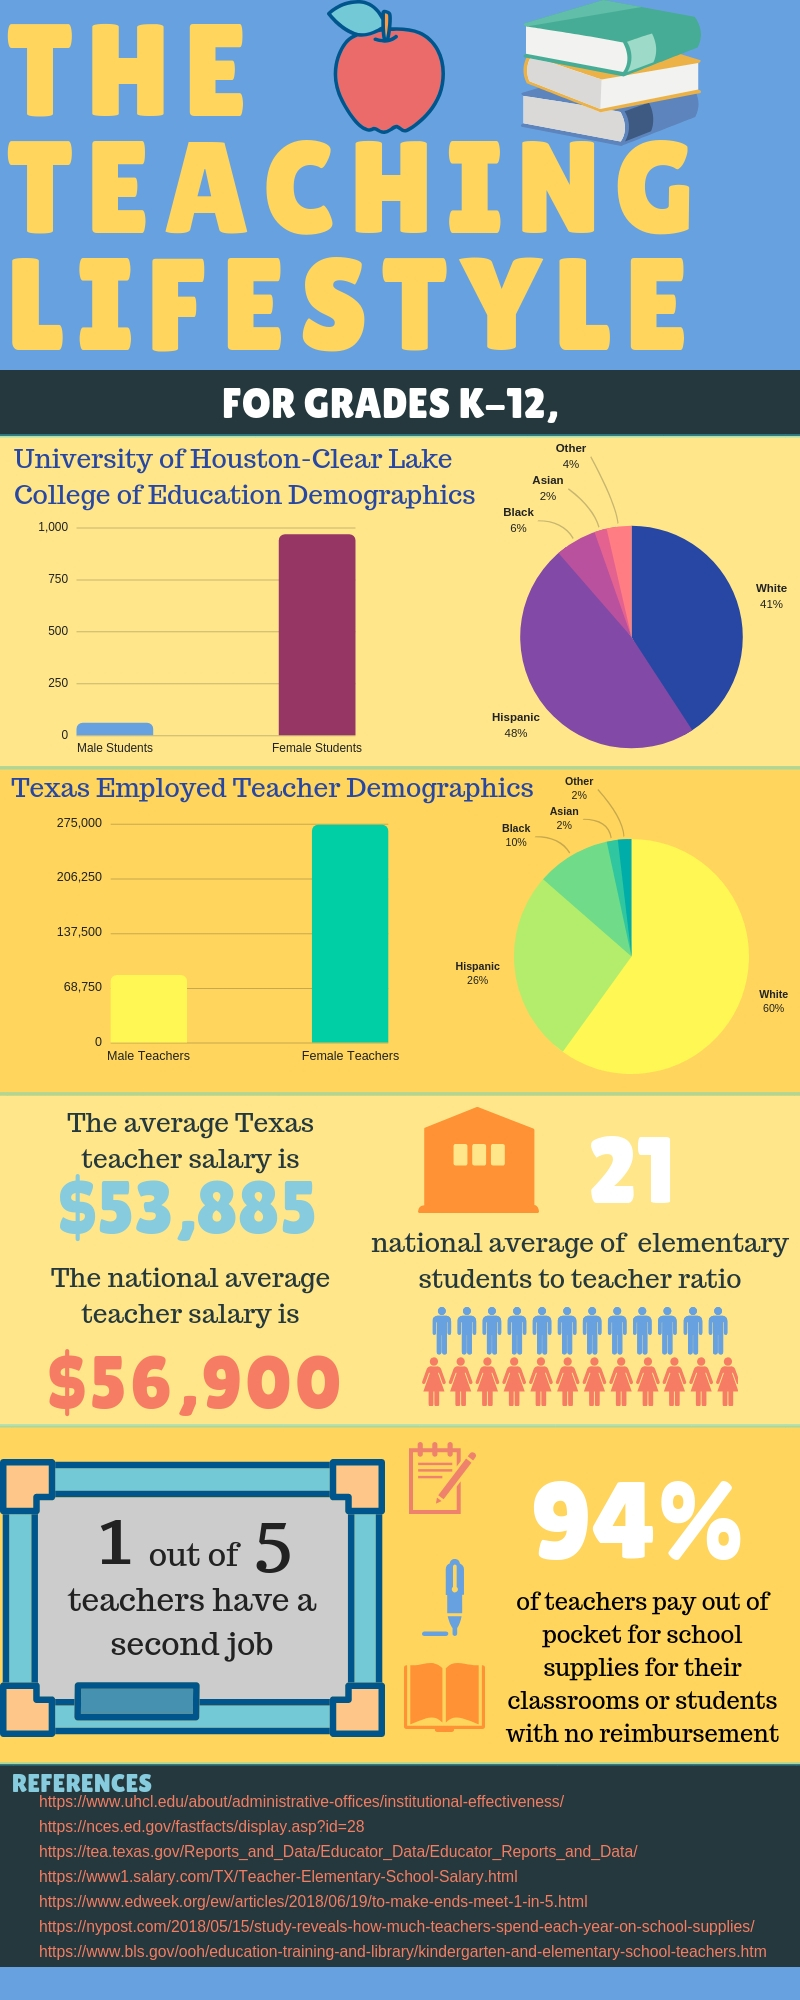 INFOGRAPHIC Statistics track the latest teacher trends both in Texas